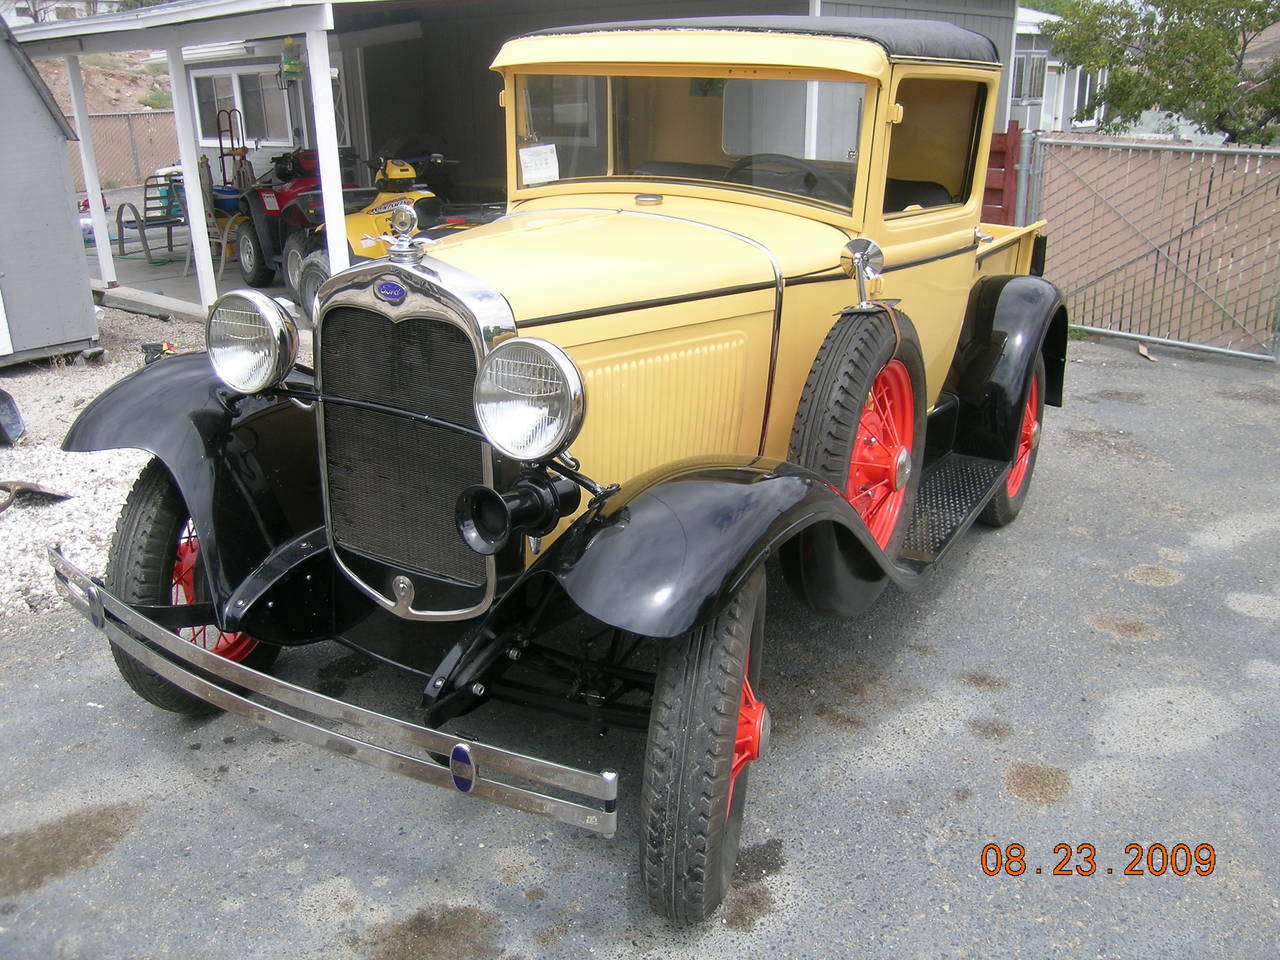 The 30 Ford